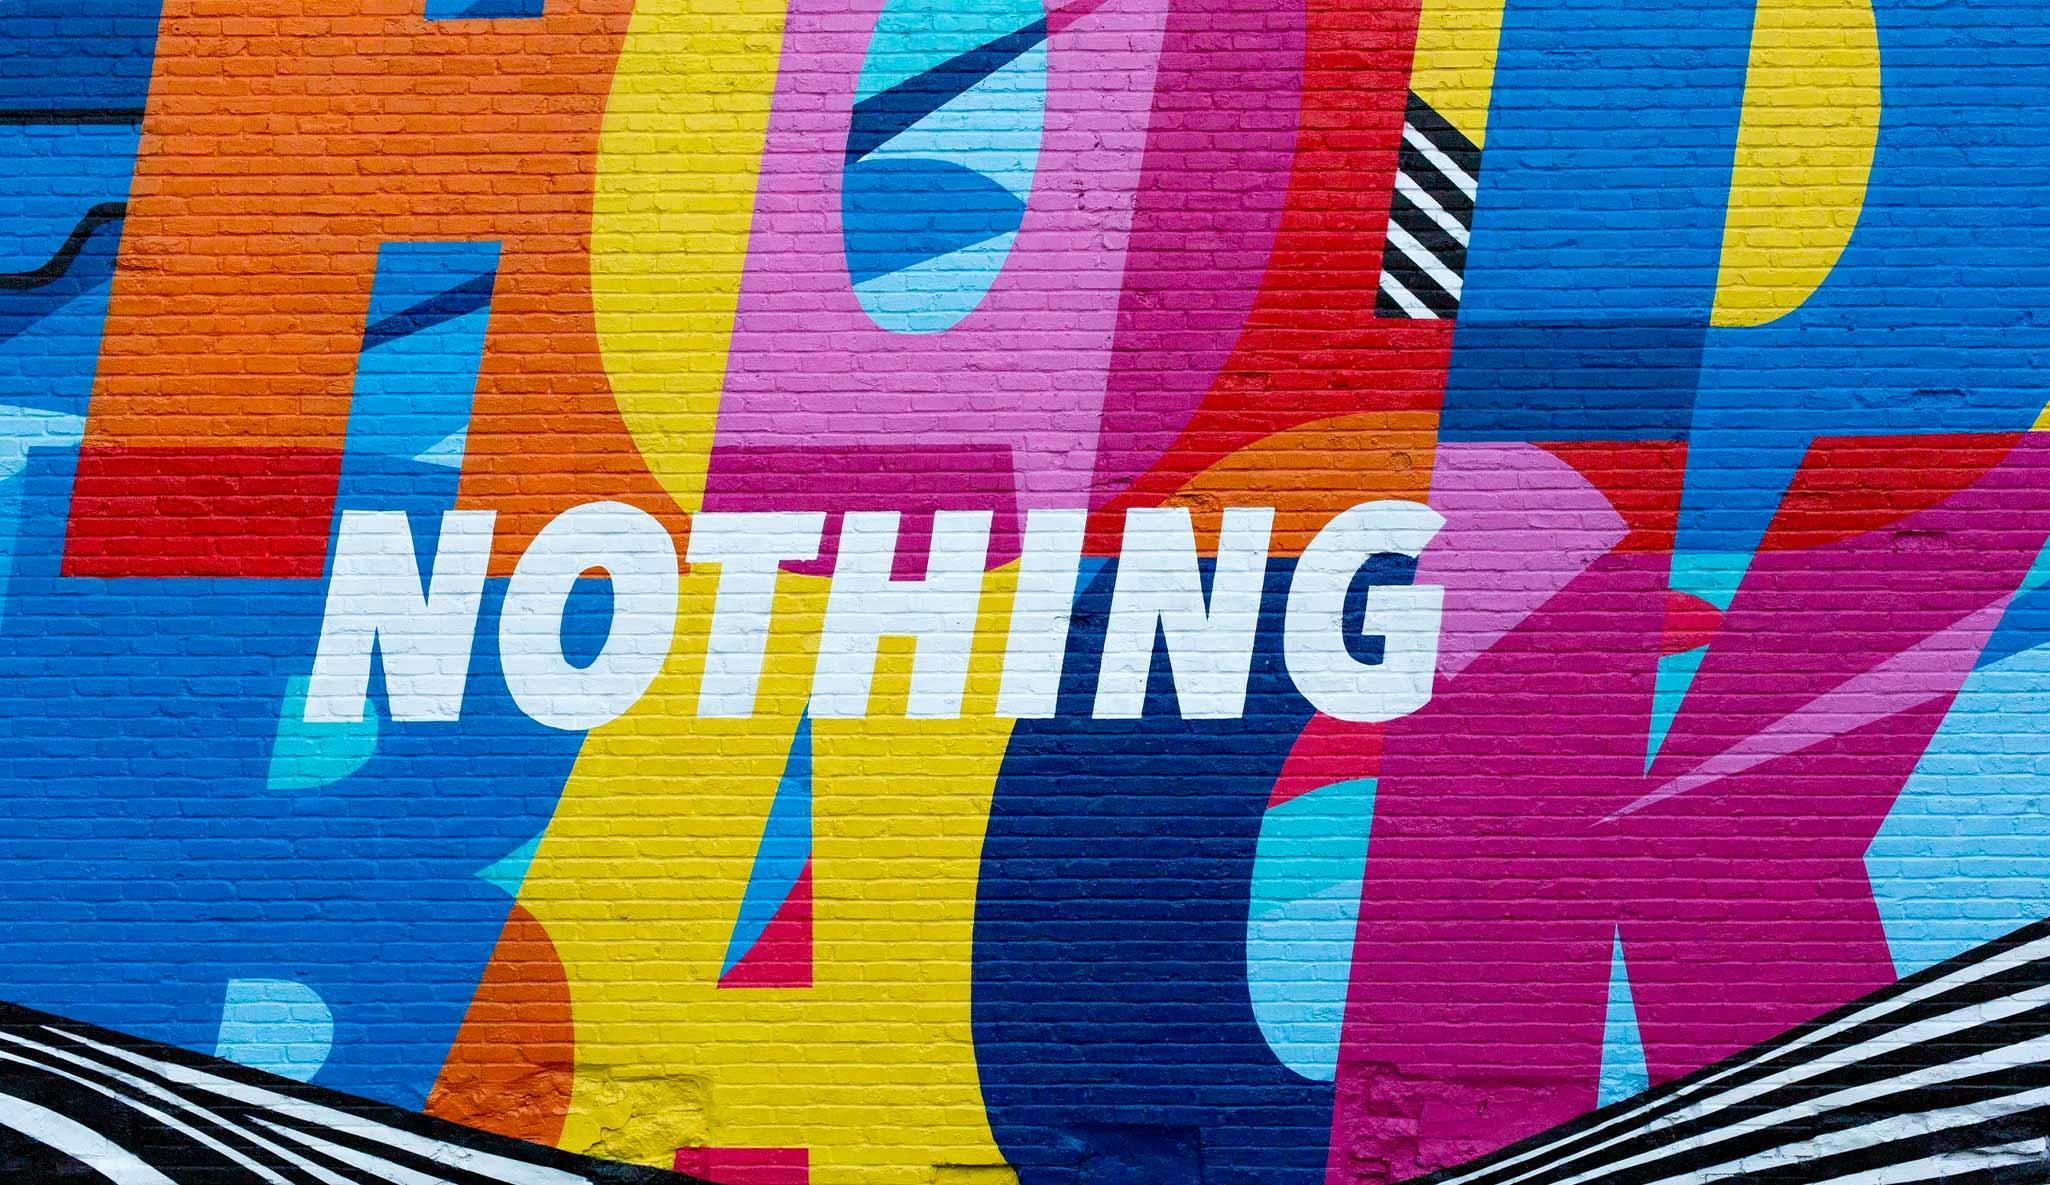 A colourful graffiti wall with the word 'Nothing' in the middle